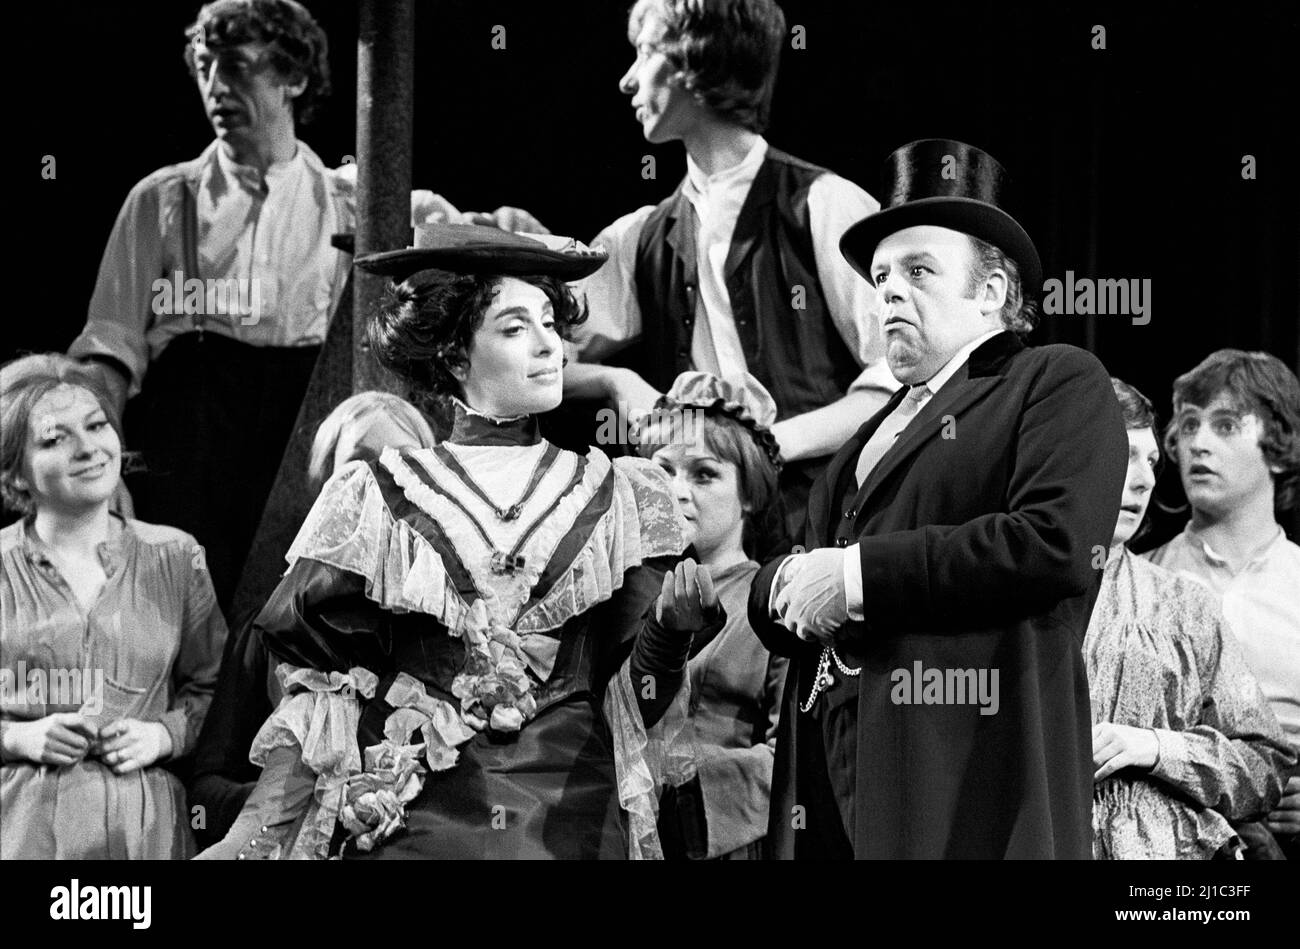 Eleanor Bron (Countess of Chell), John Savident (Mr Duncalf) in THE CARD at the Queen’s Theatre, London W1  24/07/1973  music & lyrics: Tony Hatch & Jackie Trent  book: Keith Waterhouse & Willis Hall  after the novel by Arnold Bennett  design: Malcolm Pride  musical staging & choreography: Gillian Lynne  director: Val May Stock Photo